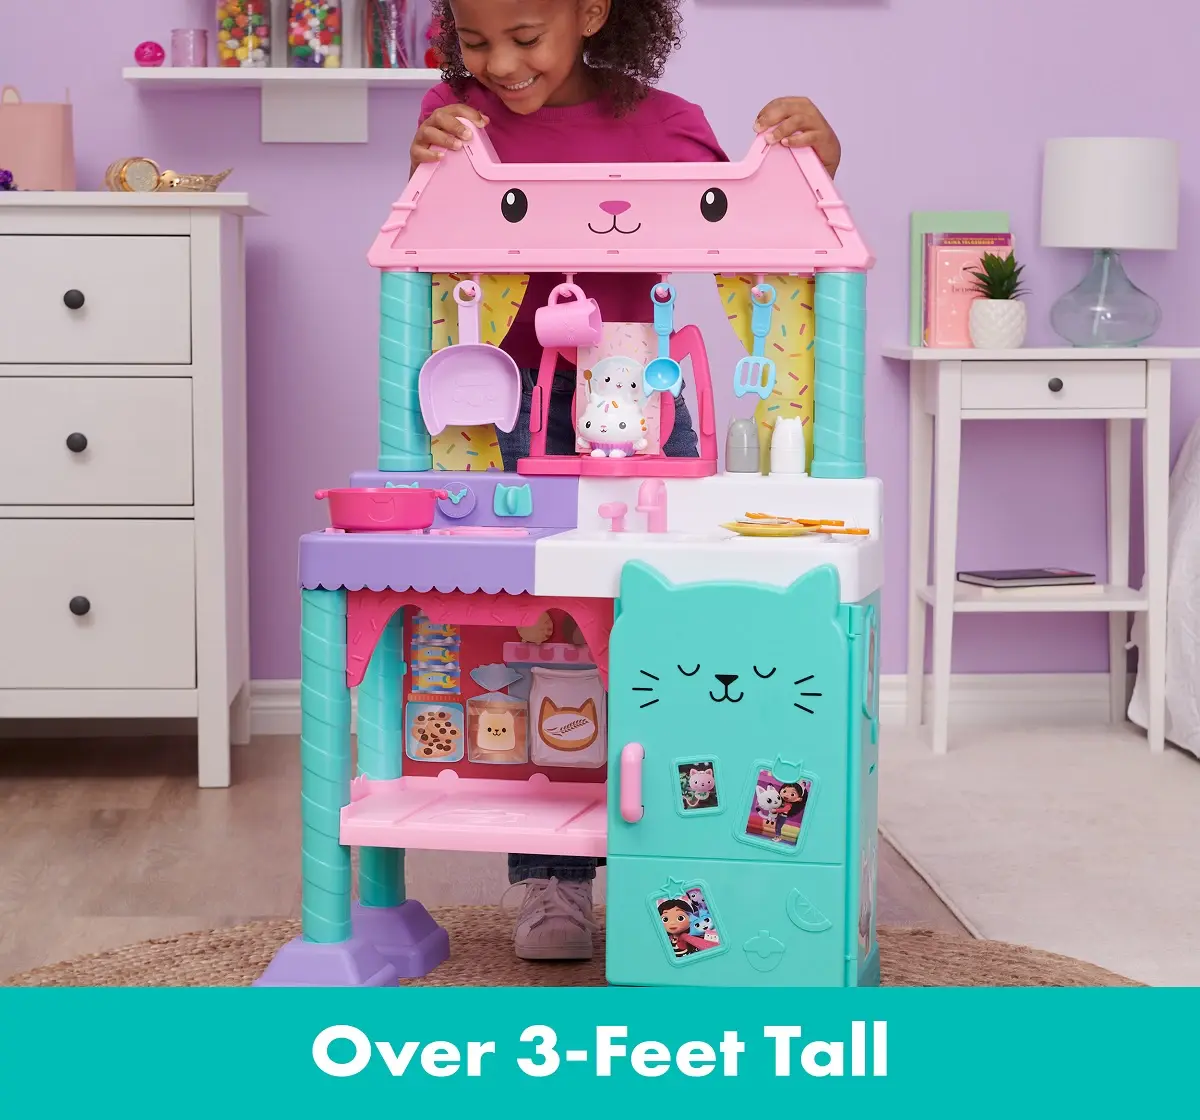 Gabby’s Dollhouse, Bakey with Cakey Kitchen with Figure and 3 Accessories,  3 Furniture and 2 Deliveries, Kids Toys for Ages 3 and up